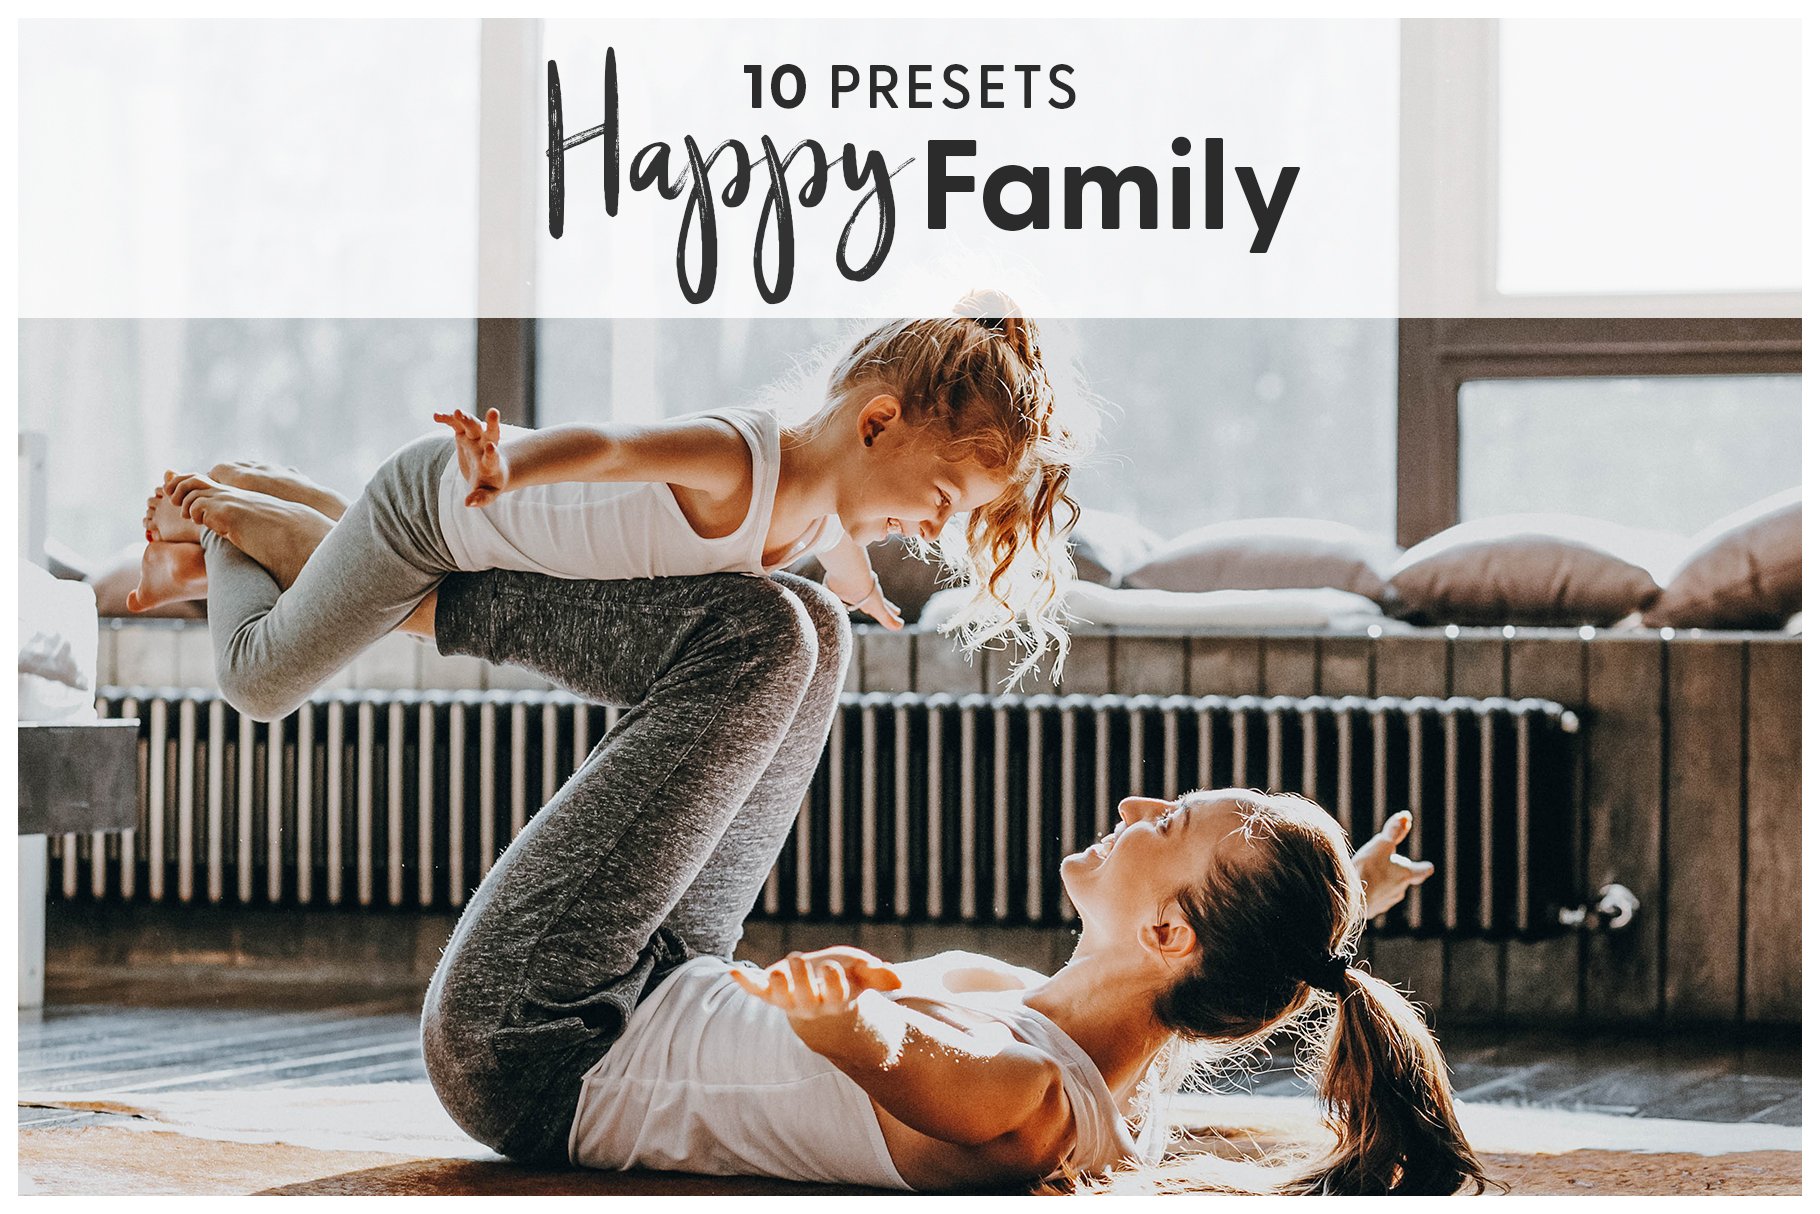 Happy Family - Actions & Presetscover image.